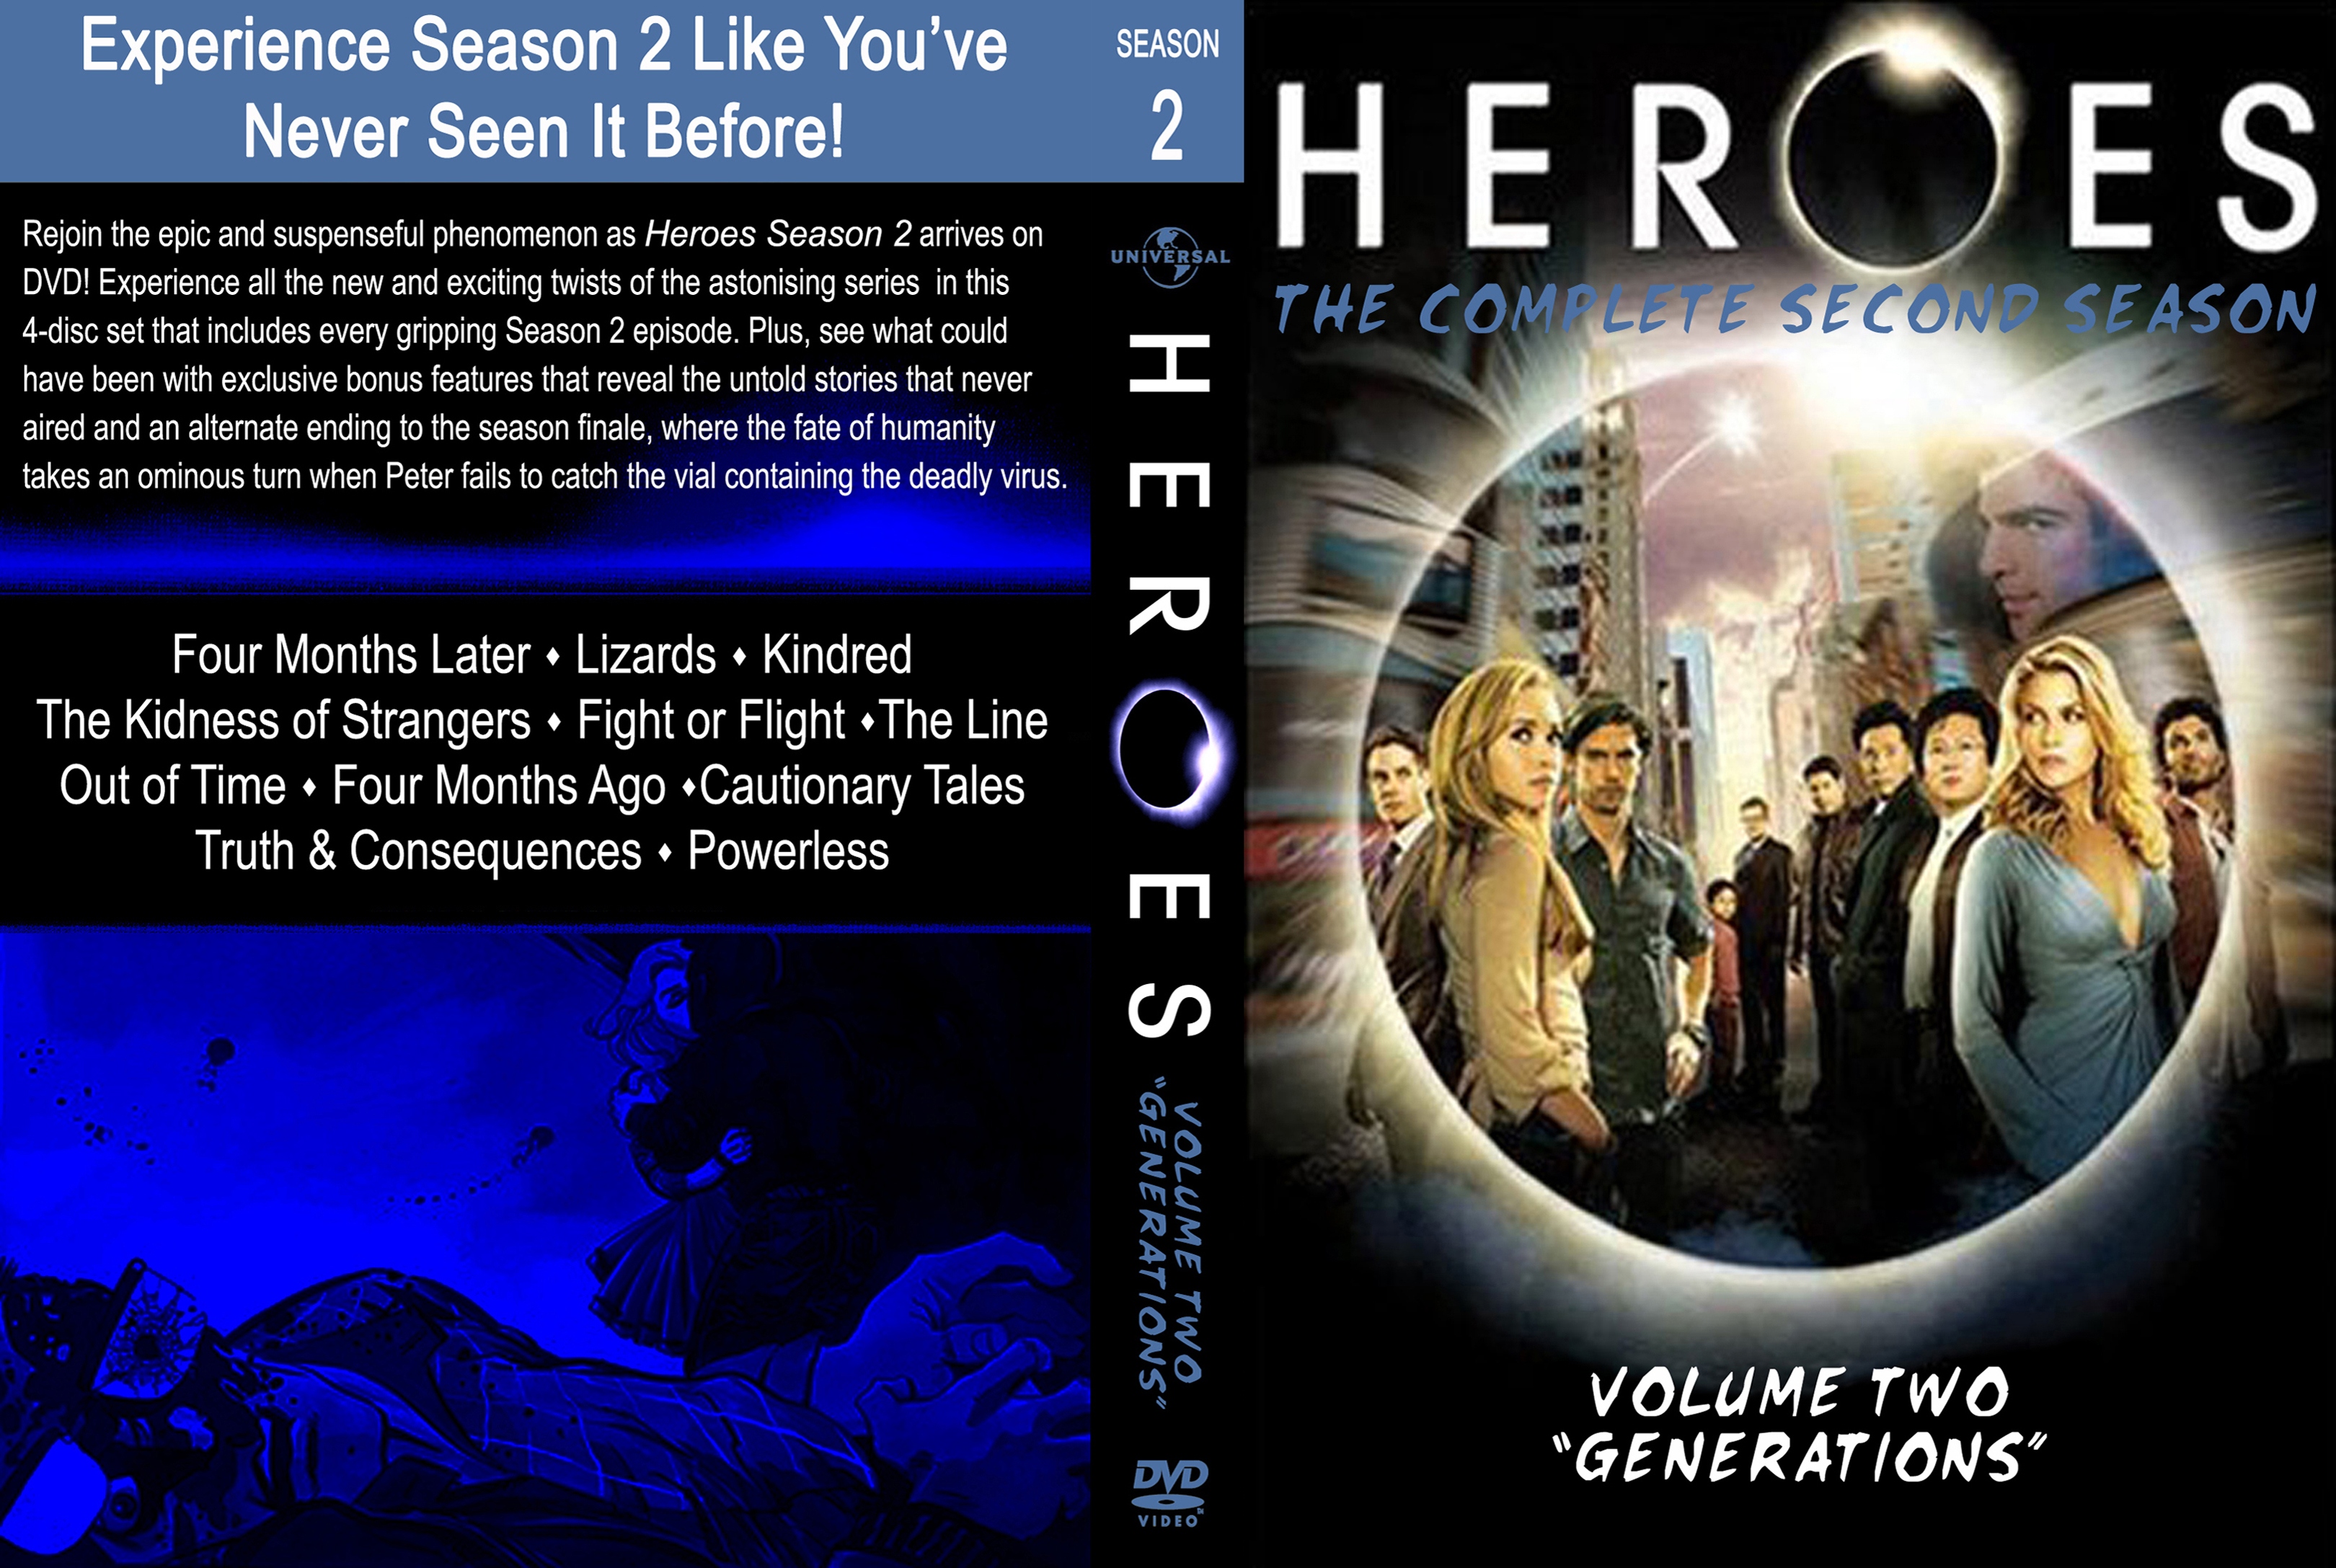 Heroes Season 2 08 Dvd Cover Dvd Covers And Labels